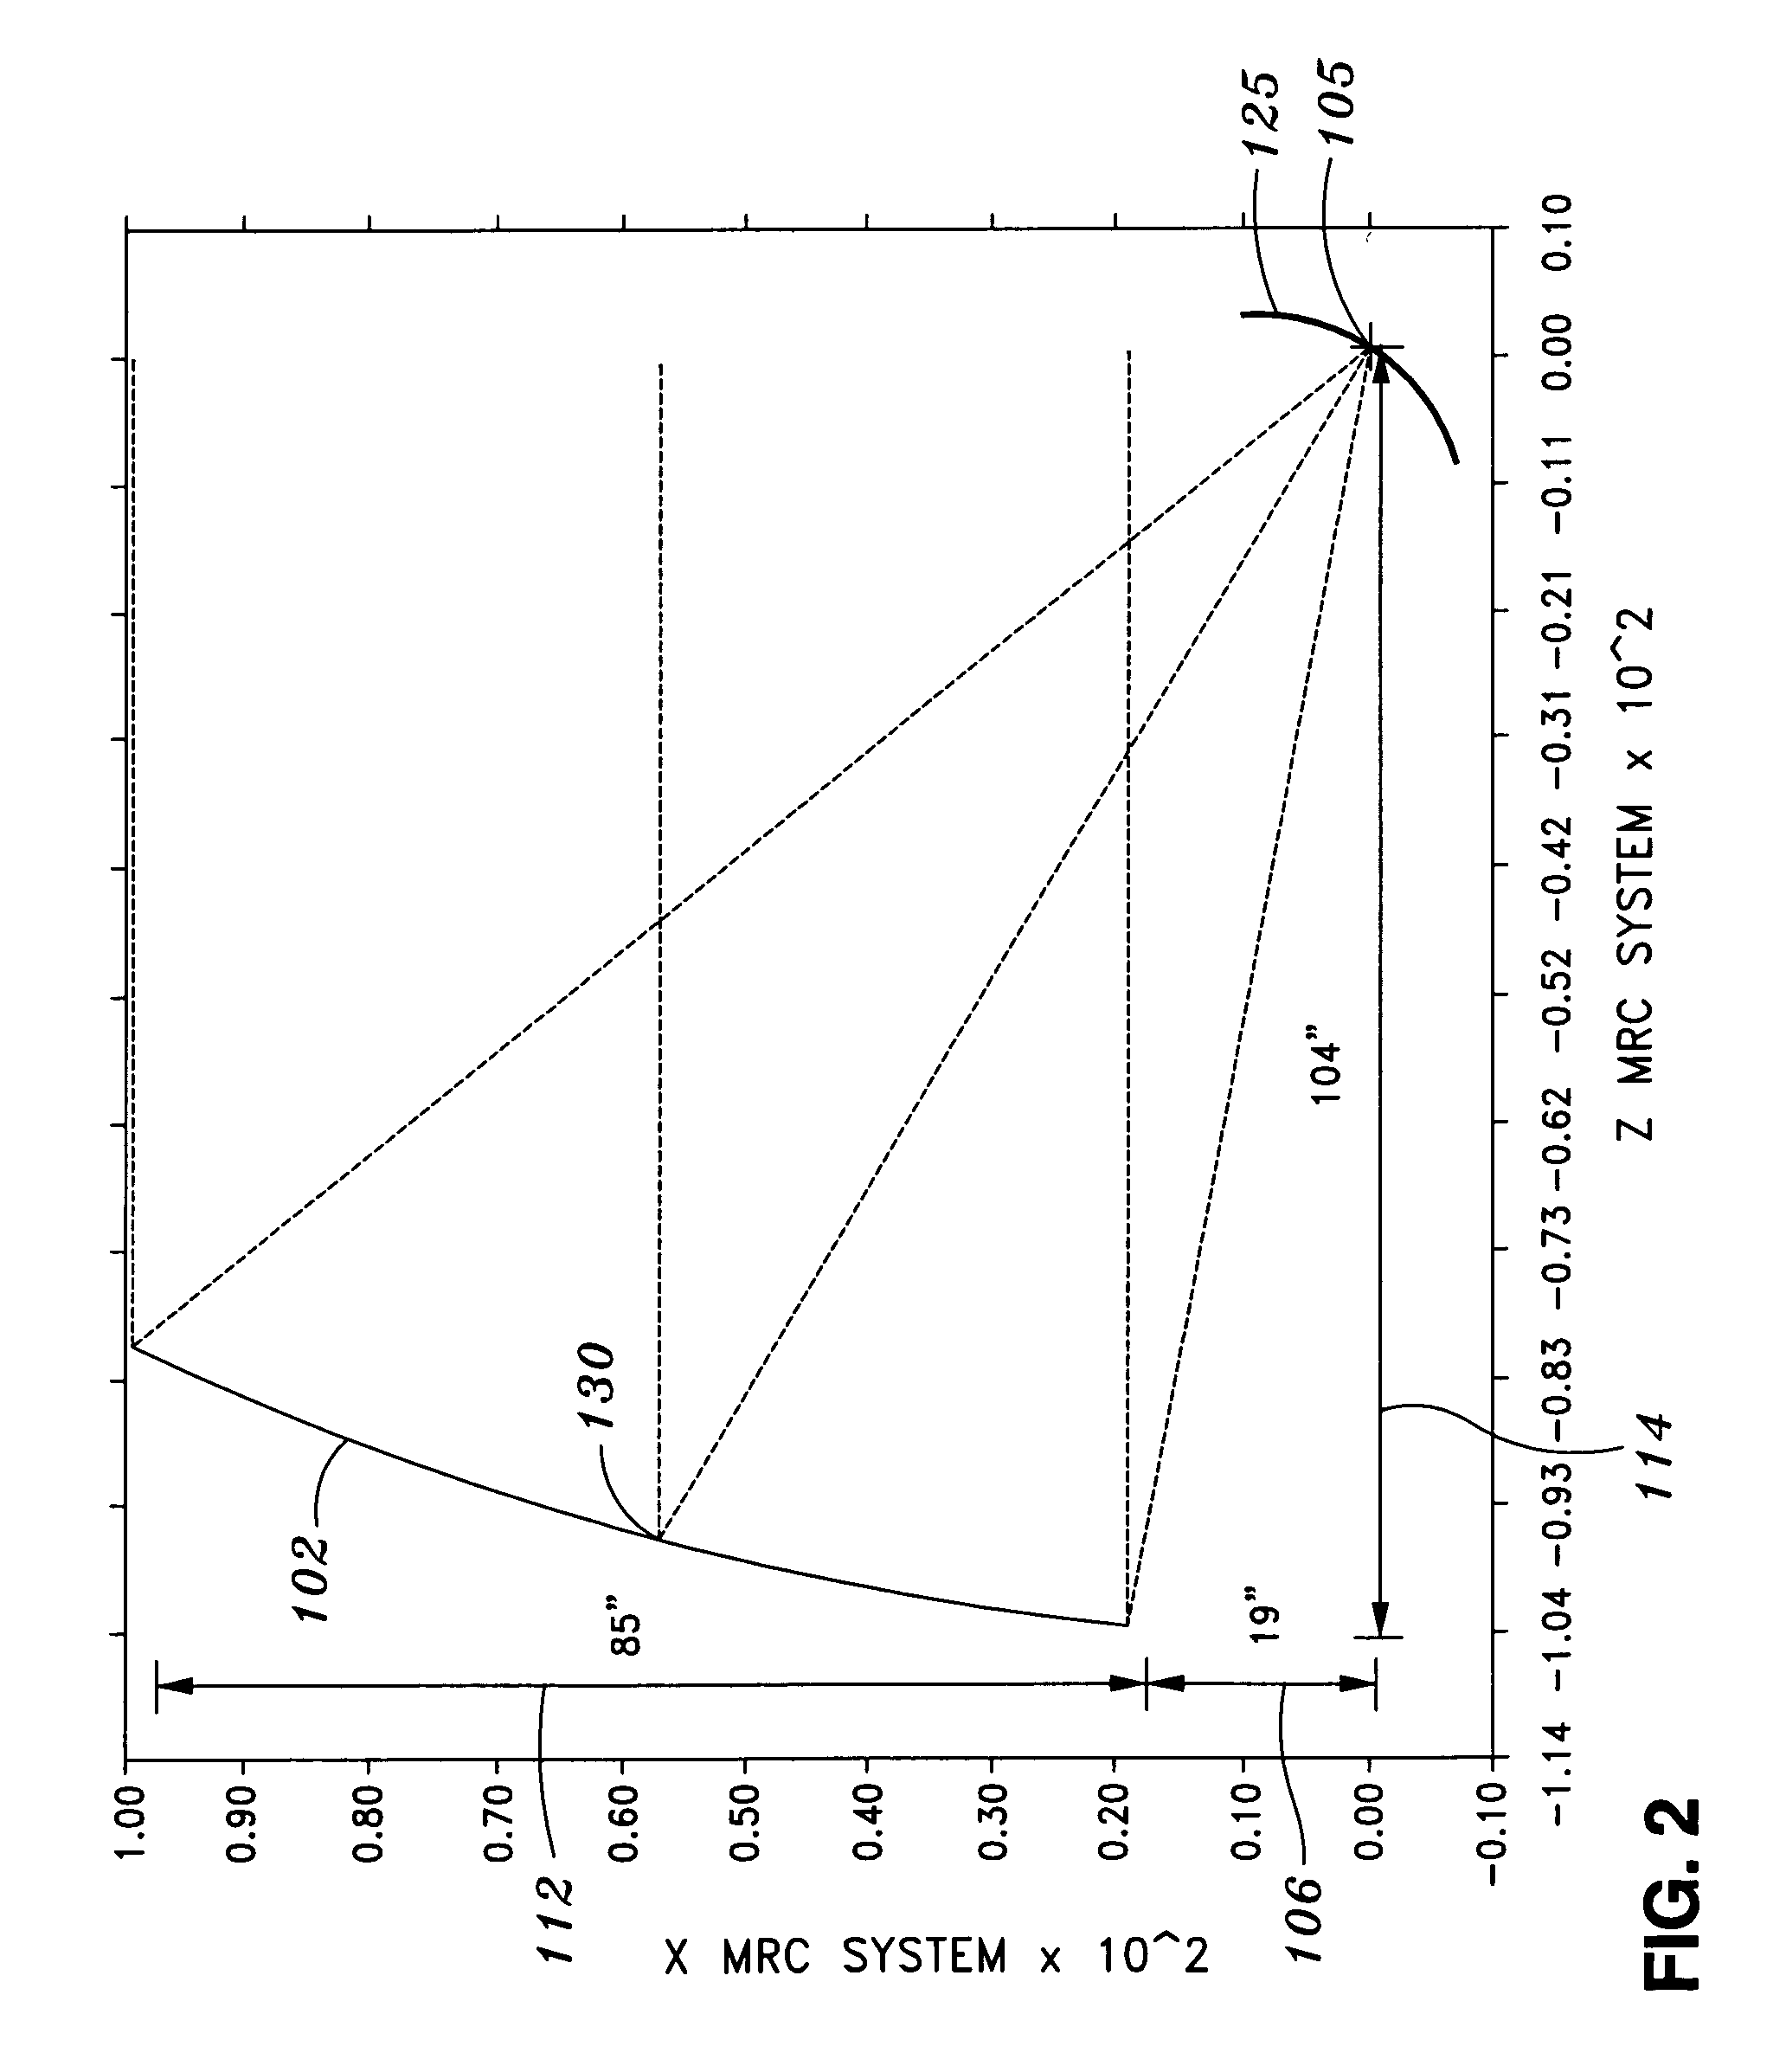 Multi-beam and multi-band antenna system for communication satellites